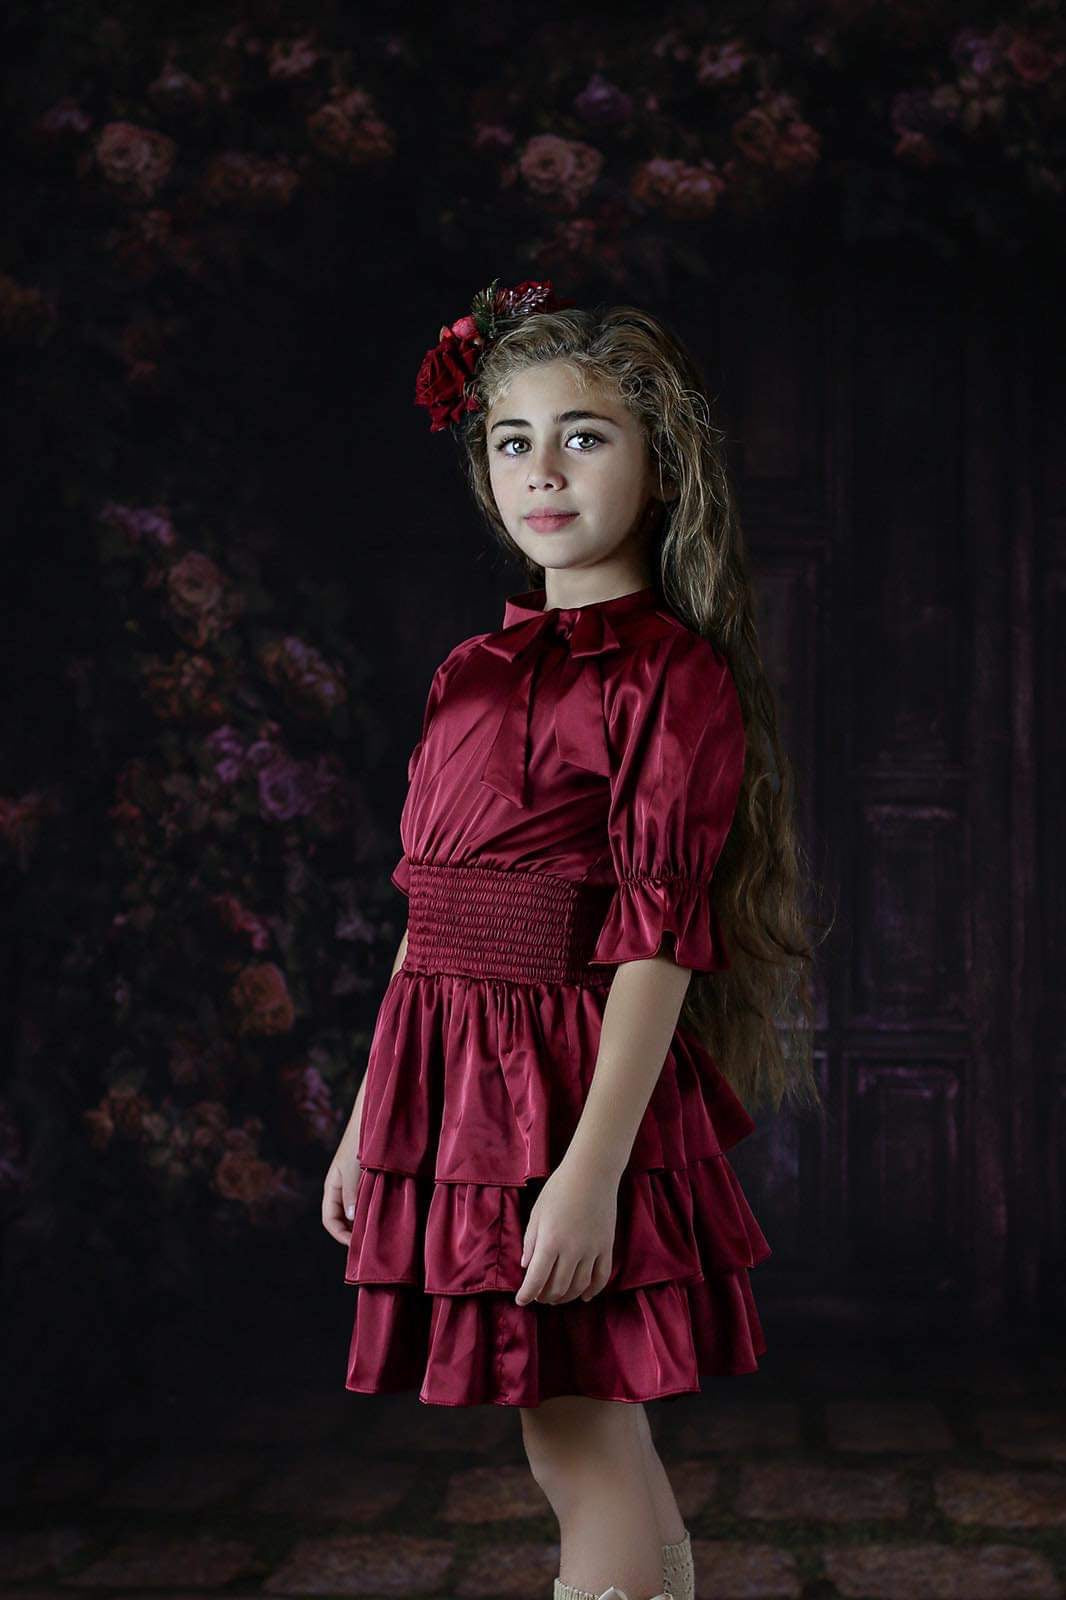 "Always By Your Side" Satin Simplicity Dress in Cranberry - Evie's Closet Clothing